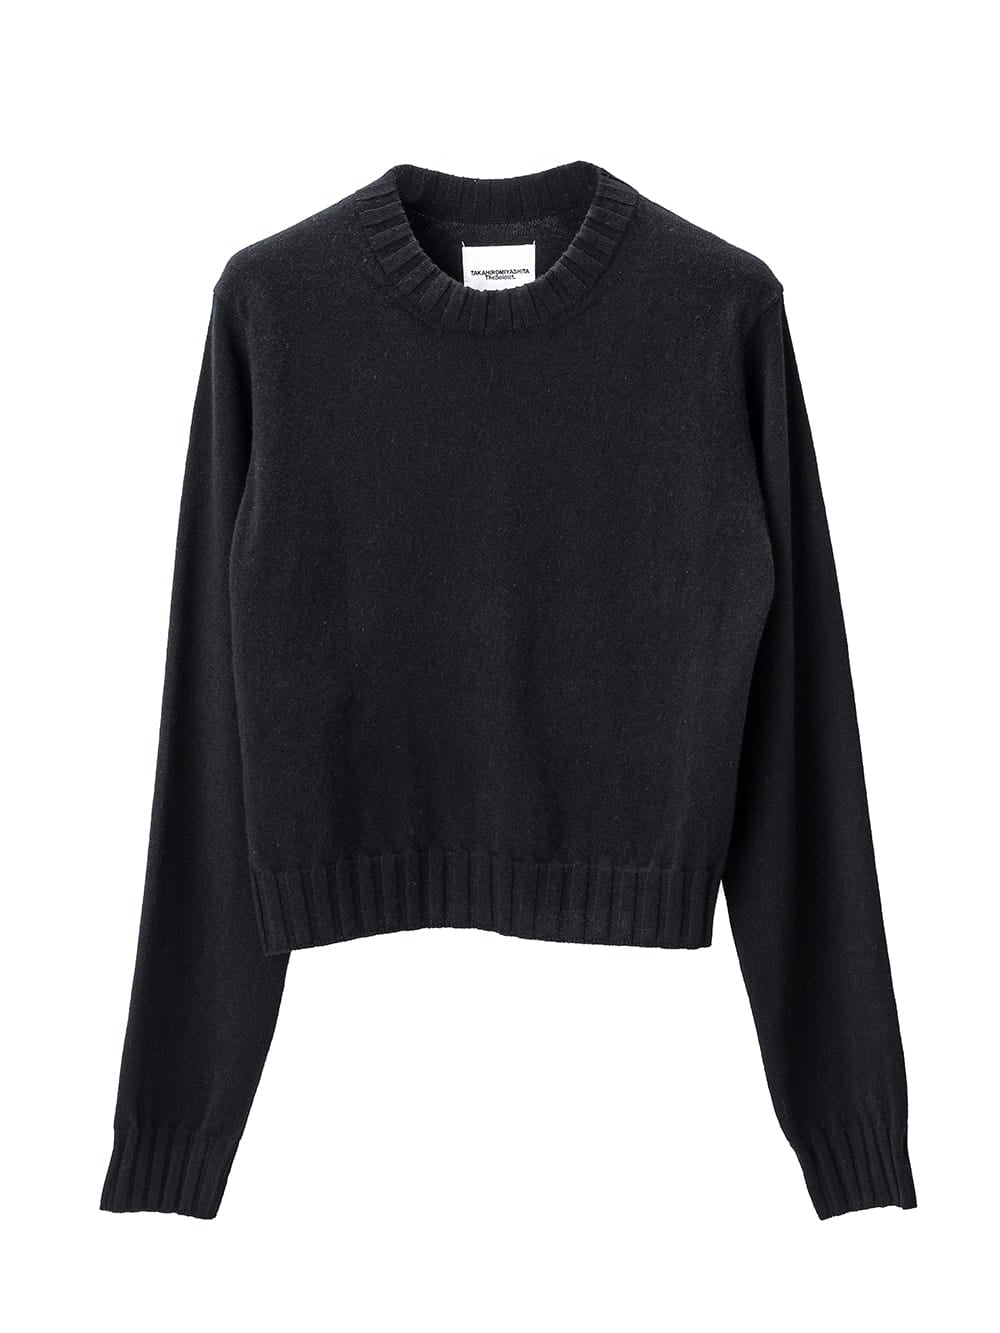 sk.0002bAW23-black lambs wool cropped crewneck sweater. THE TWO OF 